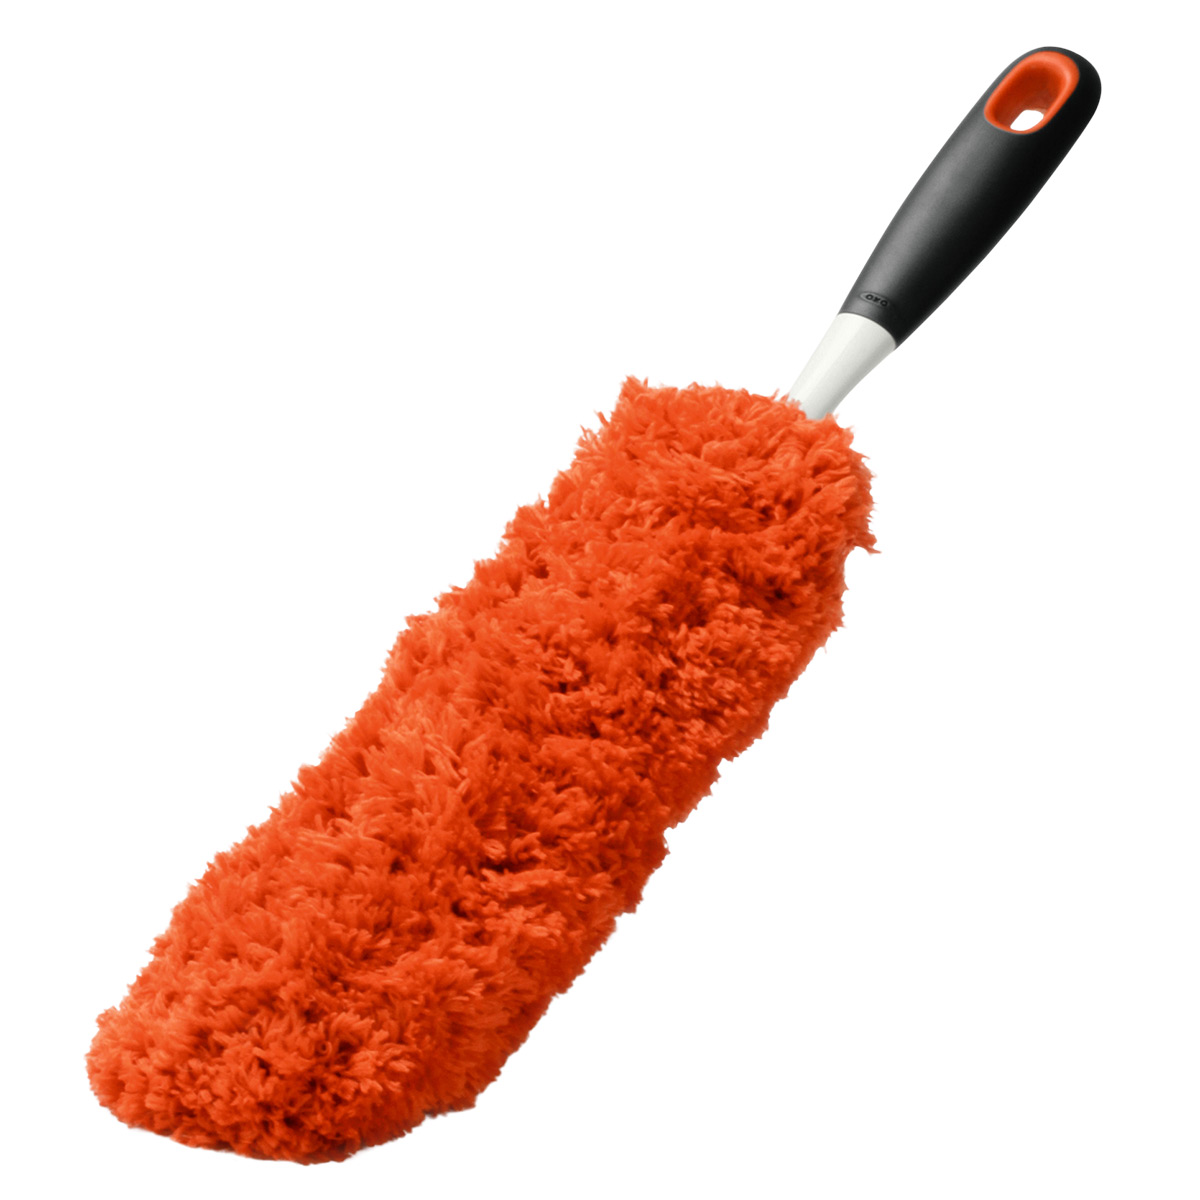 https://www.containerstore.com/catalogimages/386614/10080968-OXO-Microfiber-Hand-Duster-.jpg